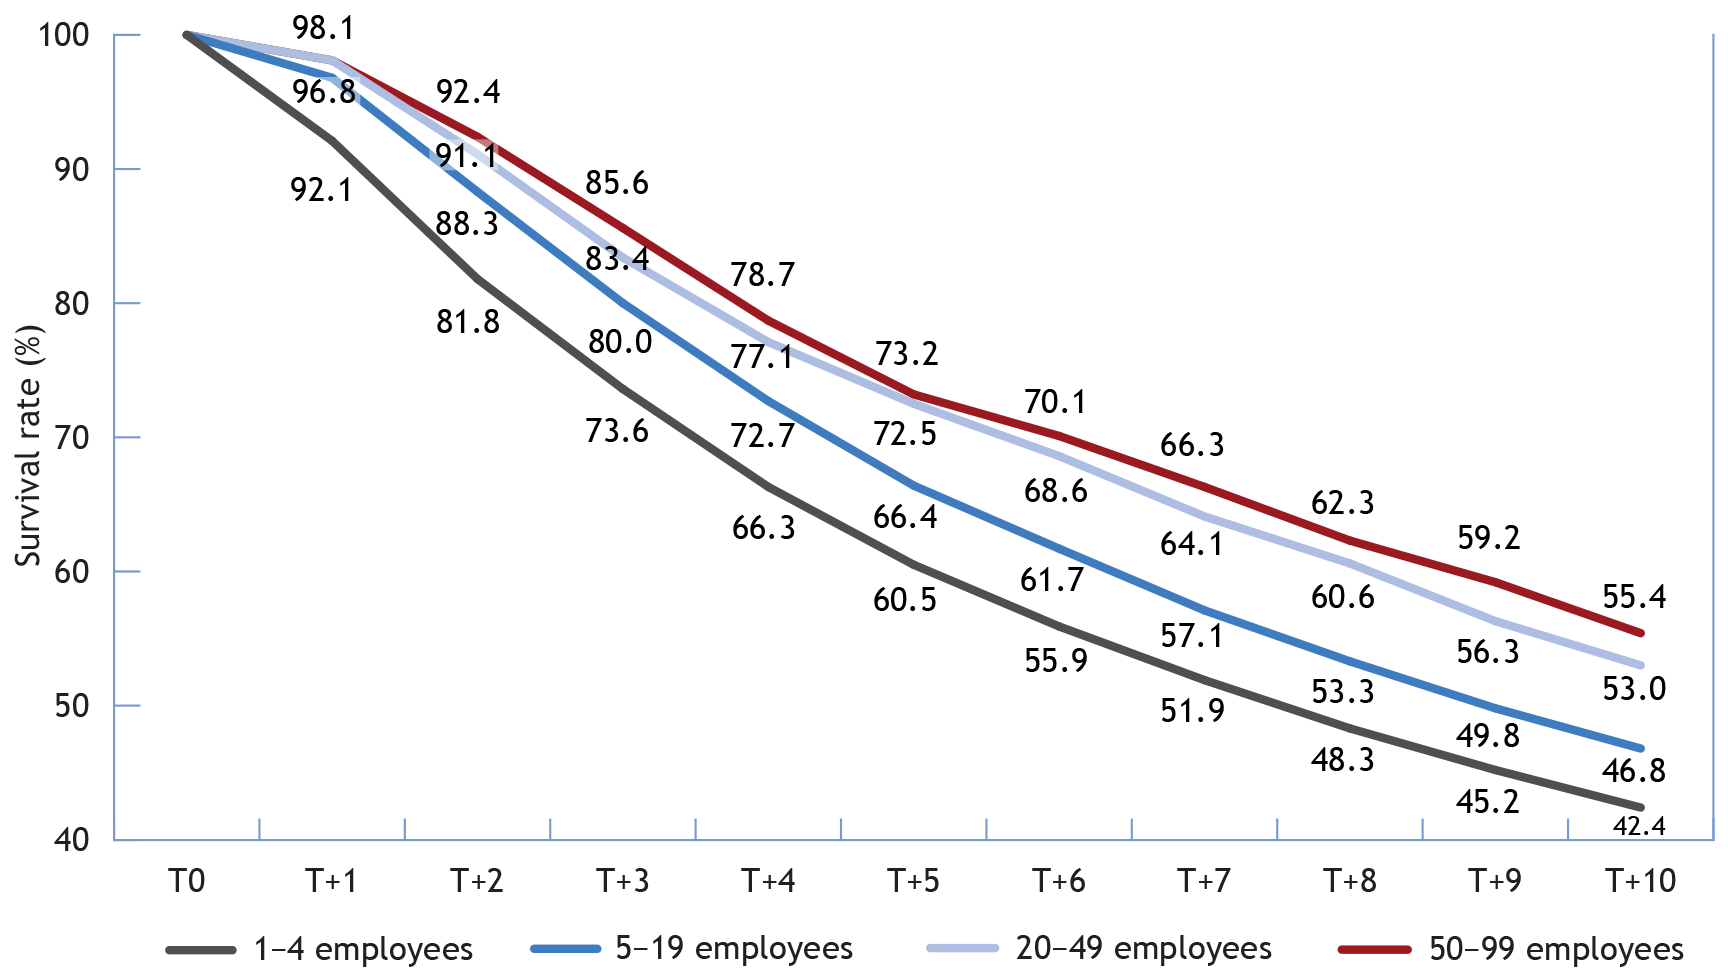 Multi-Line chart illustrating the survival rate by initial business size (the long description is located below the image)